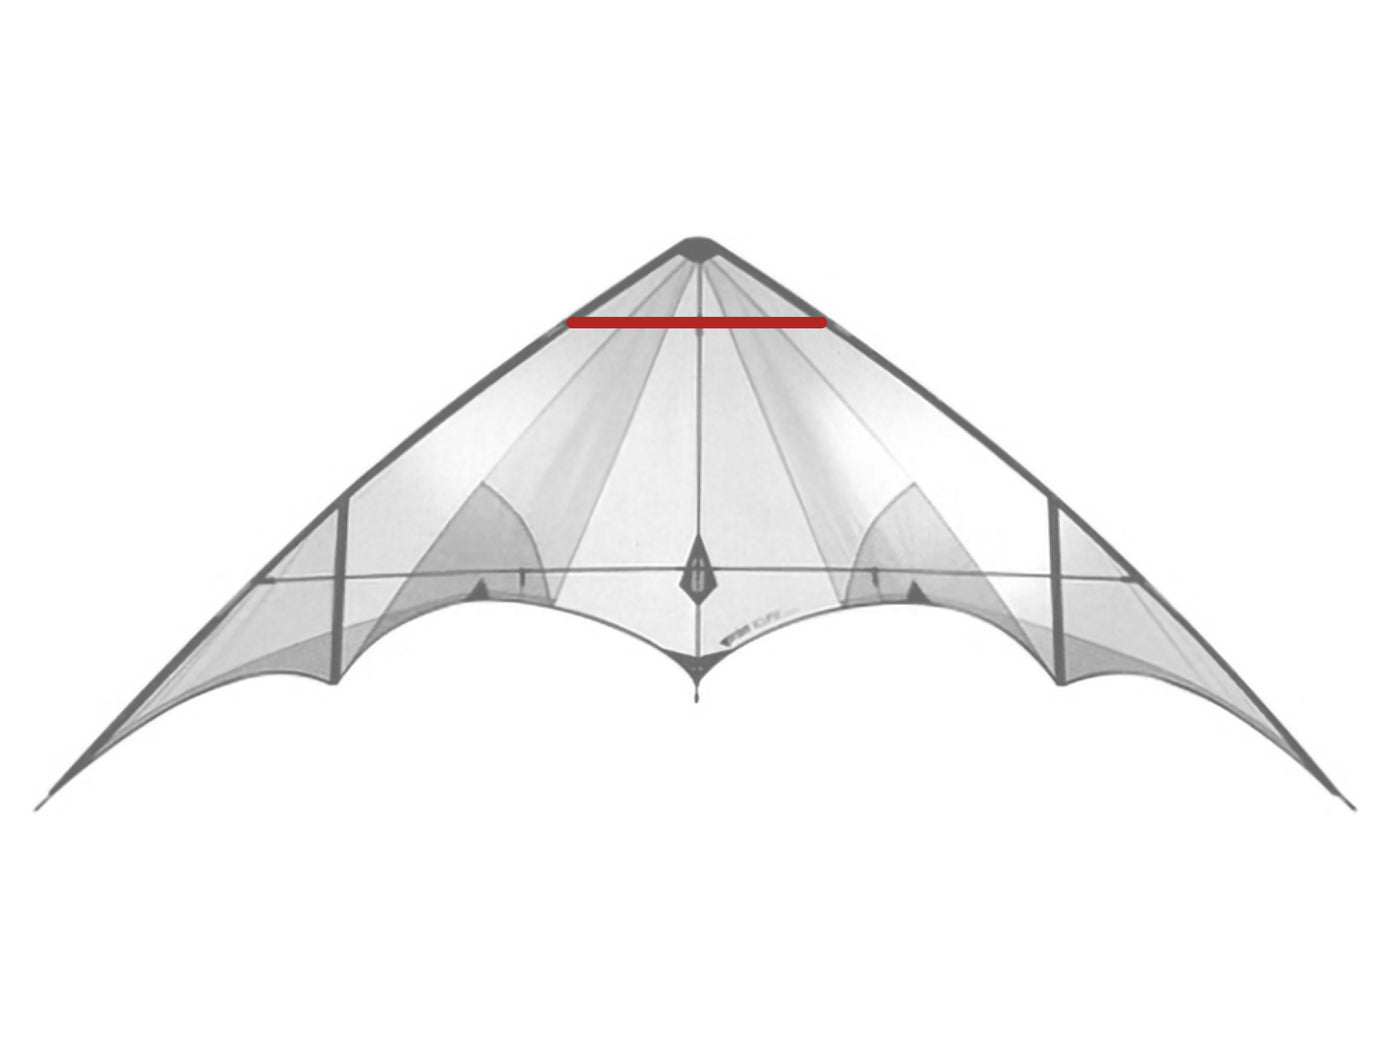 Diagram showing location of the Eclipse Vented Upper Spreader on the kite.